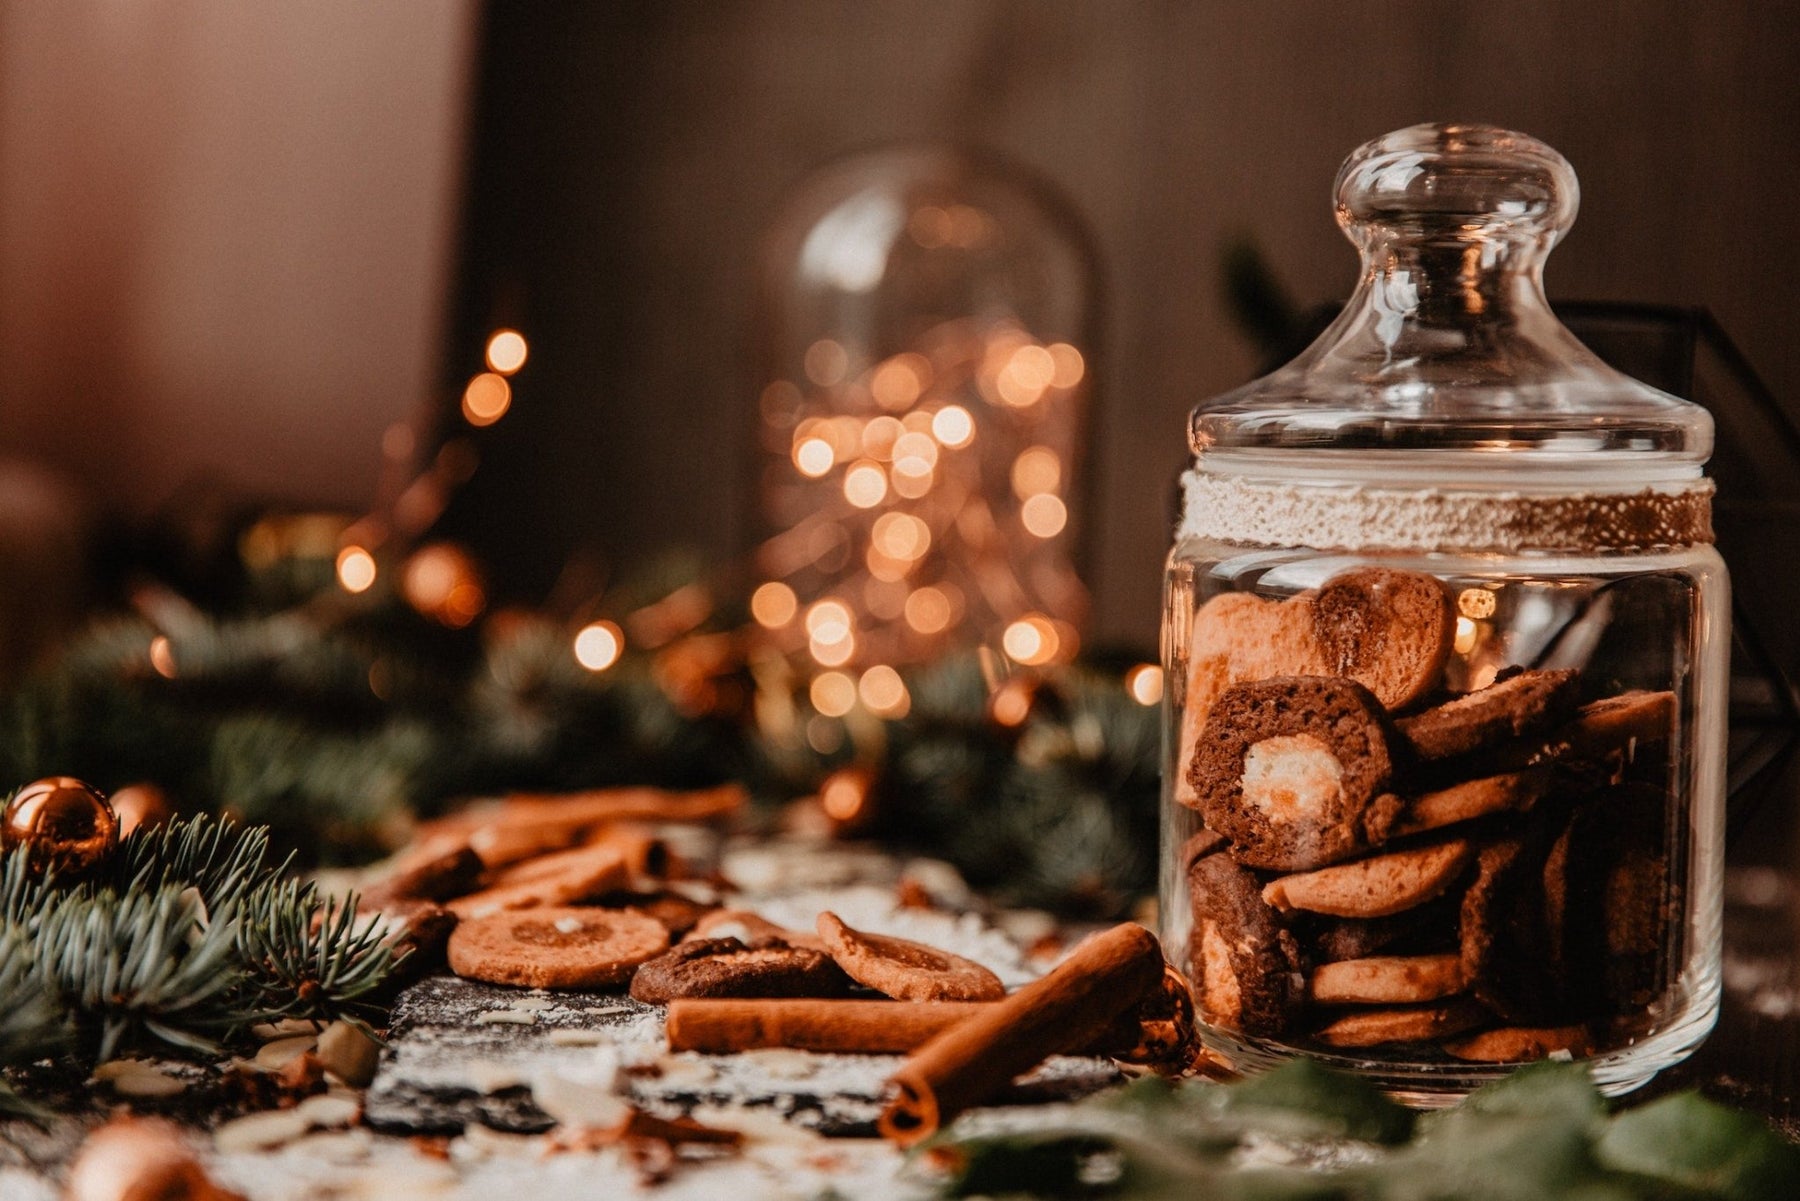 Pumpkin Spice And Everything Nice: The Best Holiday Spices For Winter Treats - Antsy Labs